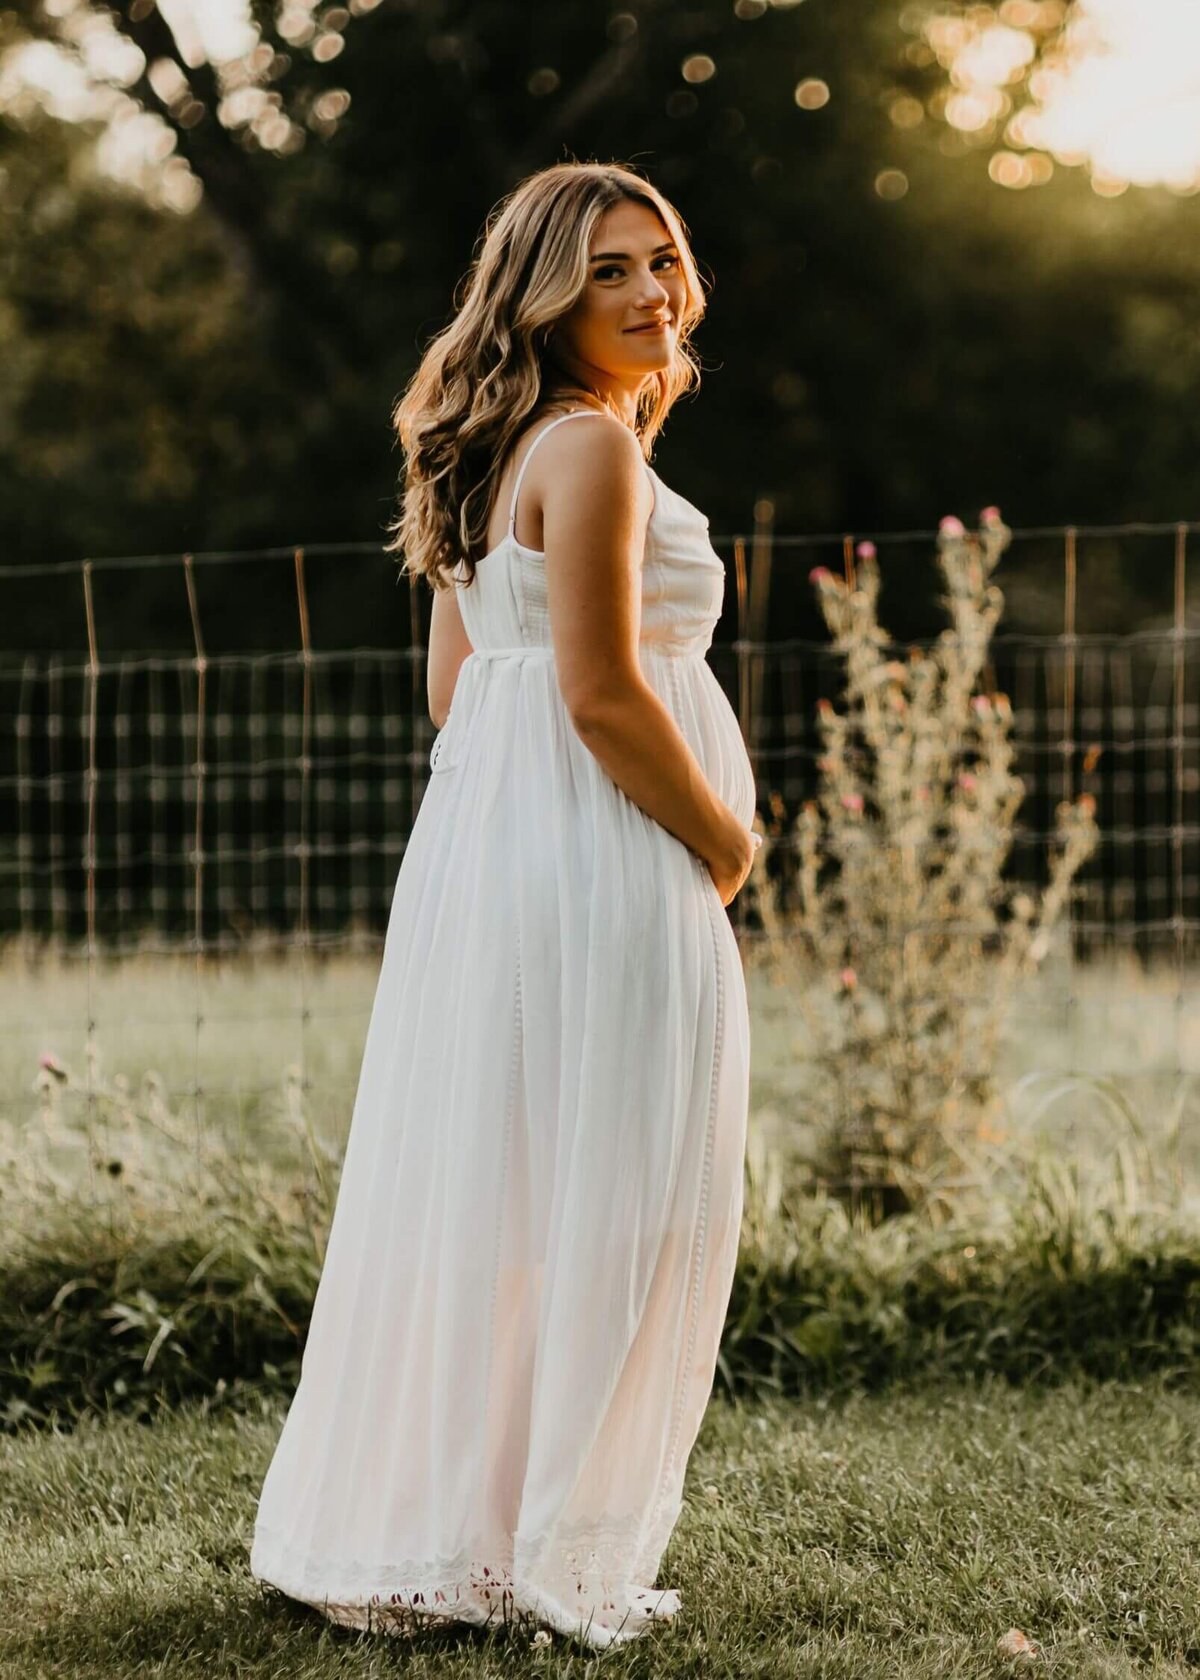 A pregnant woman in a white dress stands elegantly in a field, captured by a Pittsburgh maternity photographer.